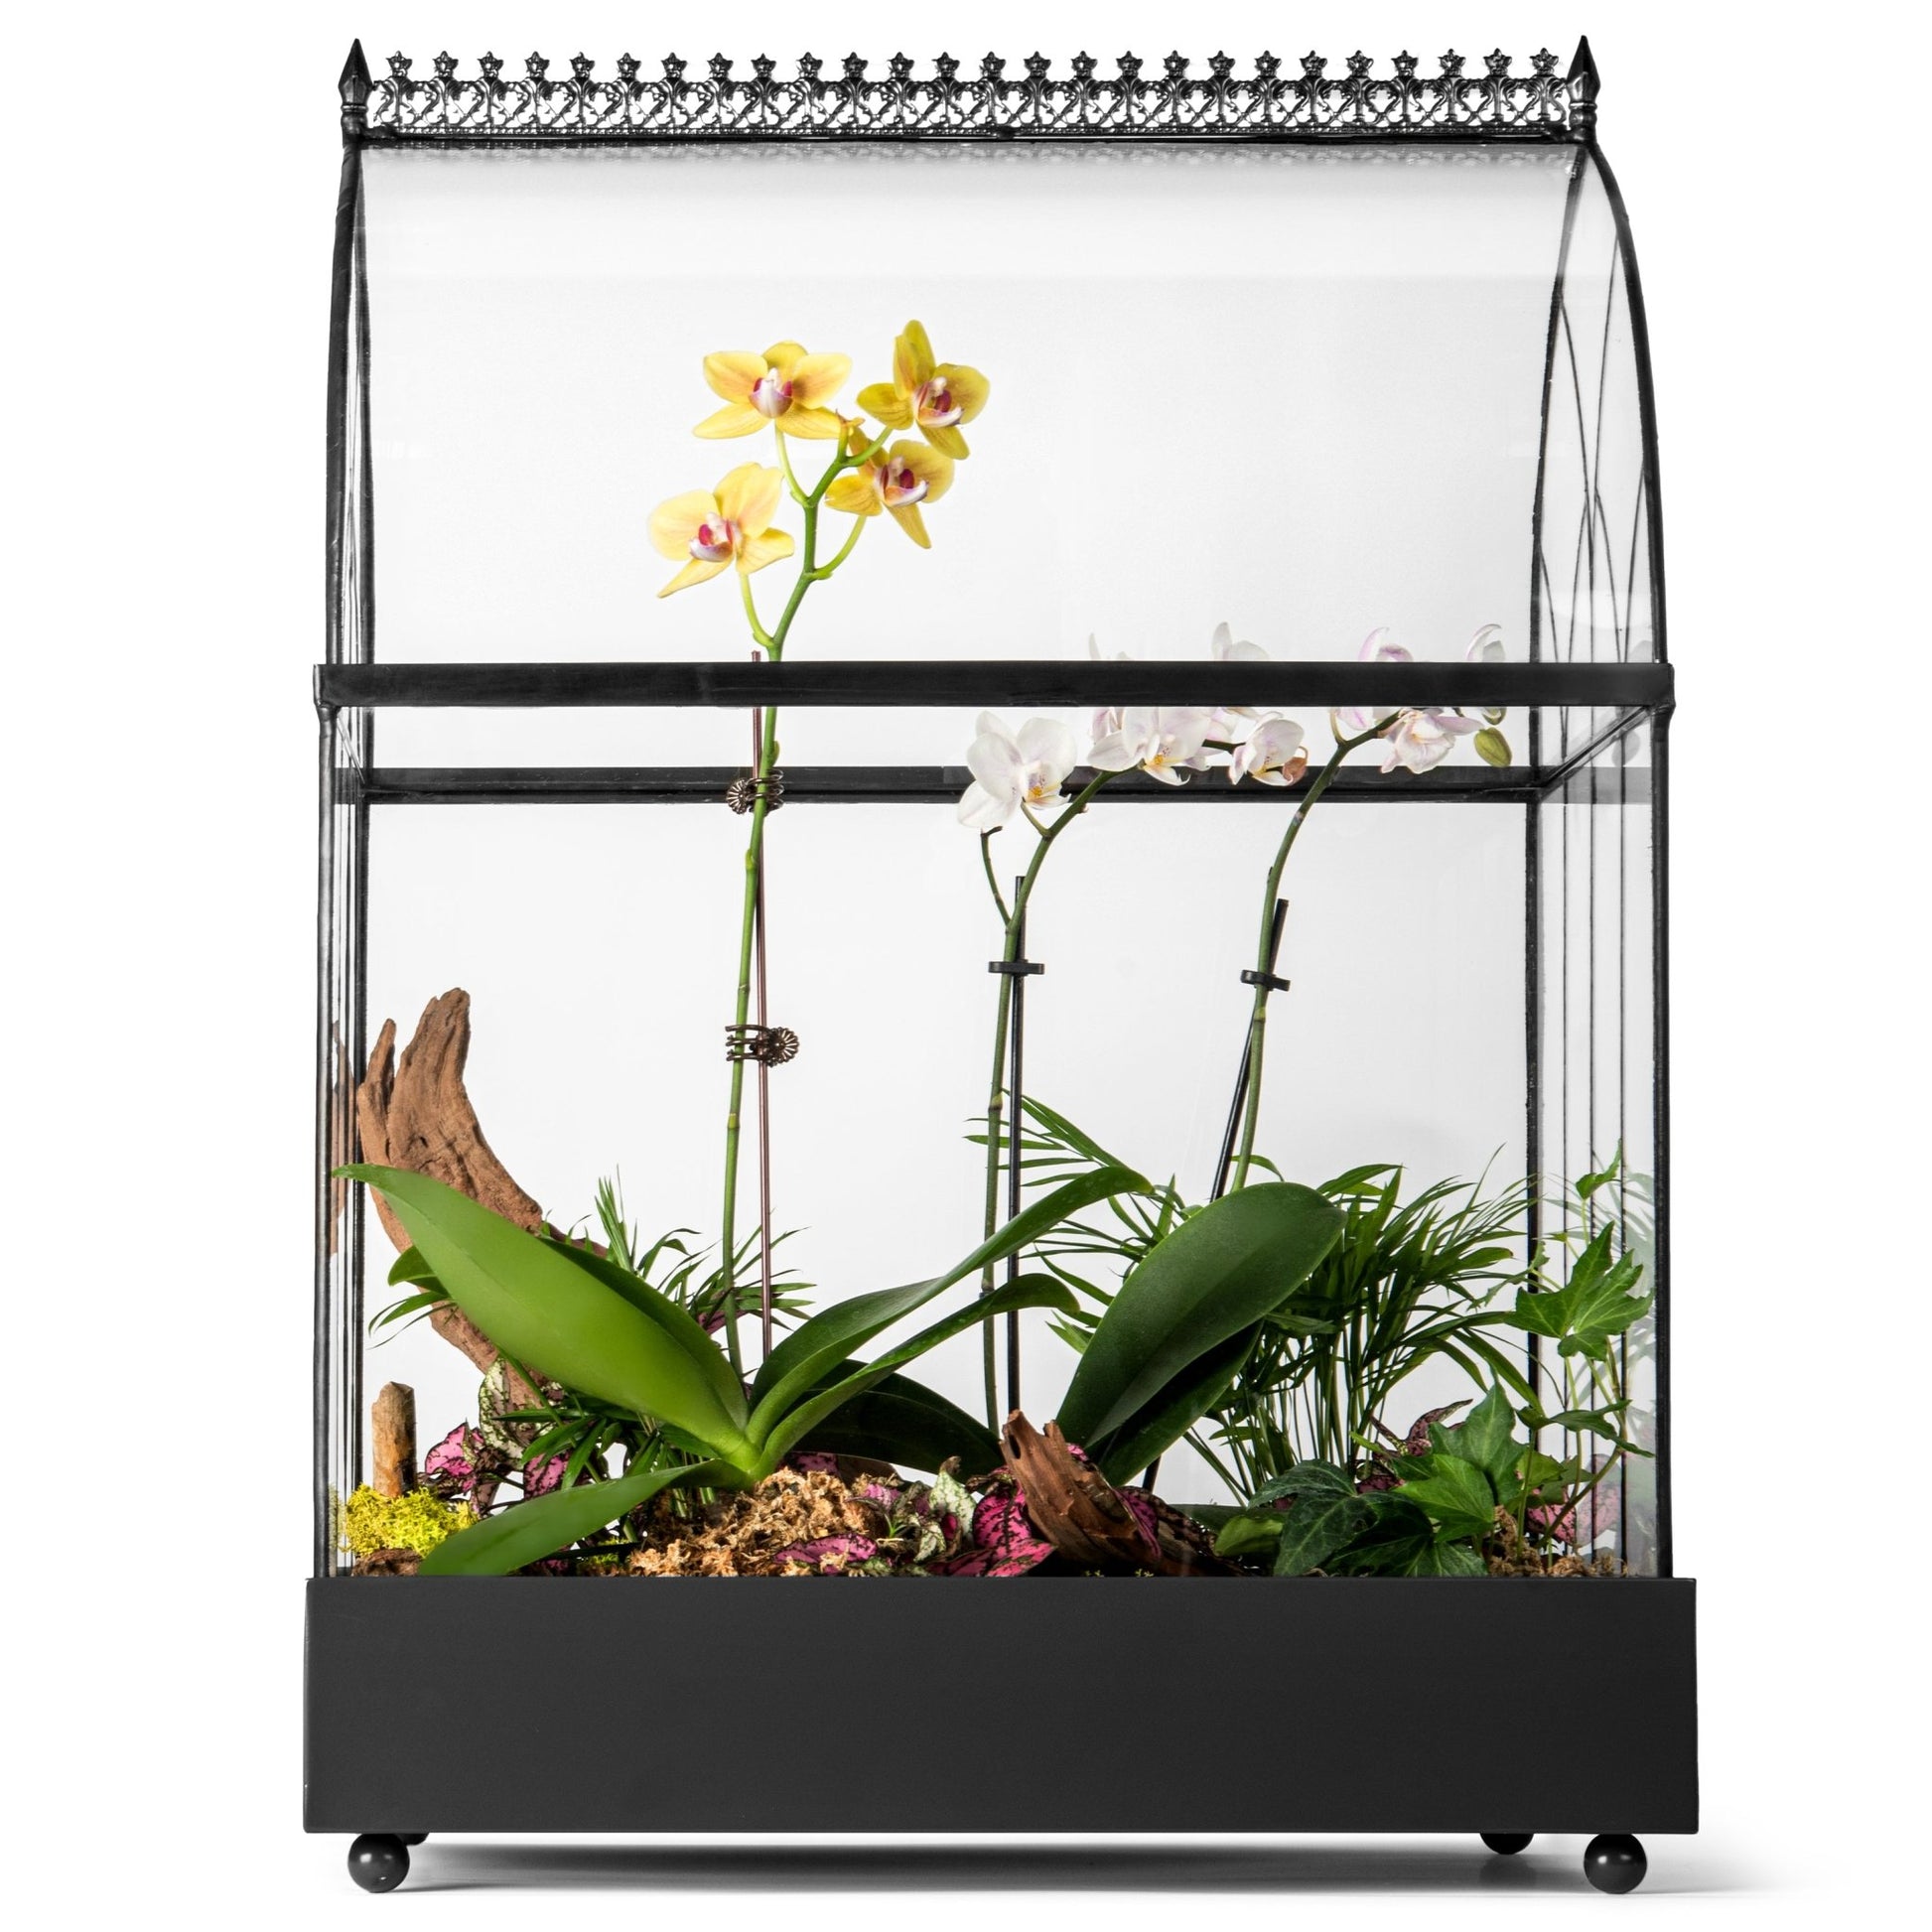  H Potter Glass Terrarium Planter Wardian Case Container with  Green Glass Accent for Succulent Plants Flowers Orchids Foliage and More  WAR143 : Patio, Lawn & Garden